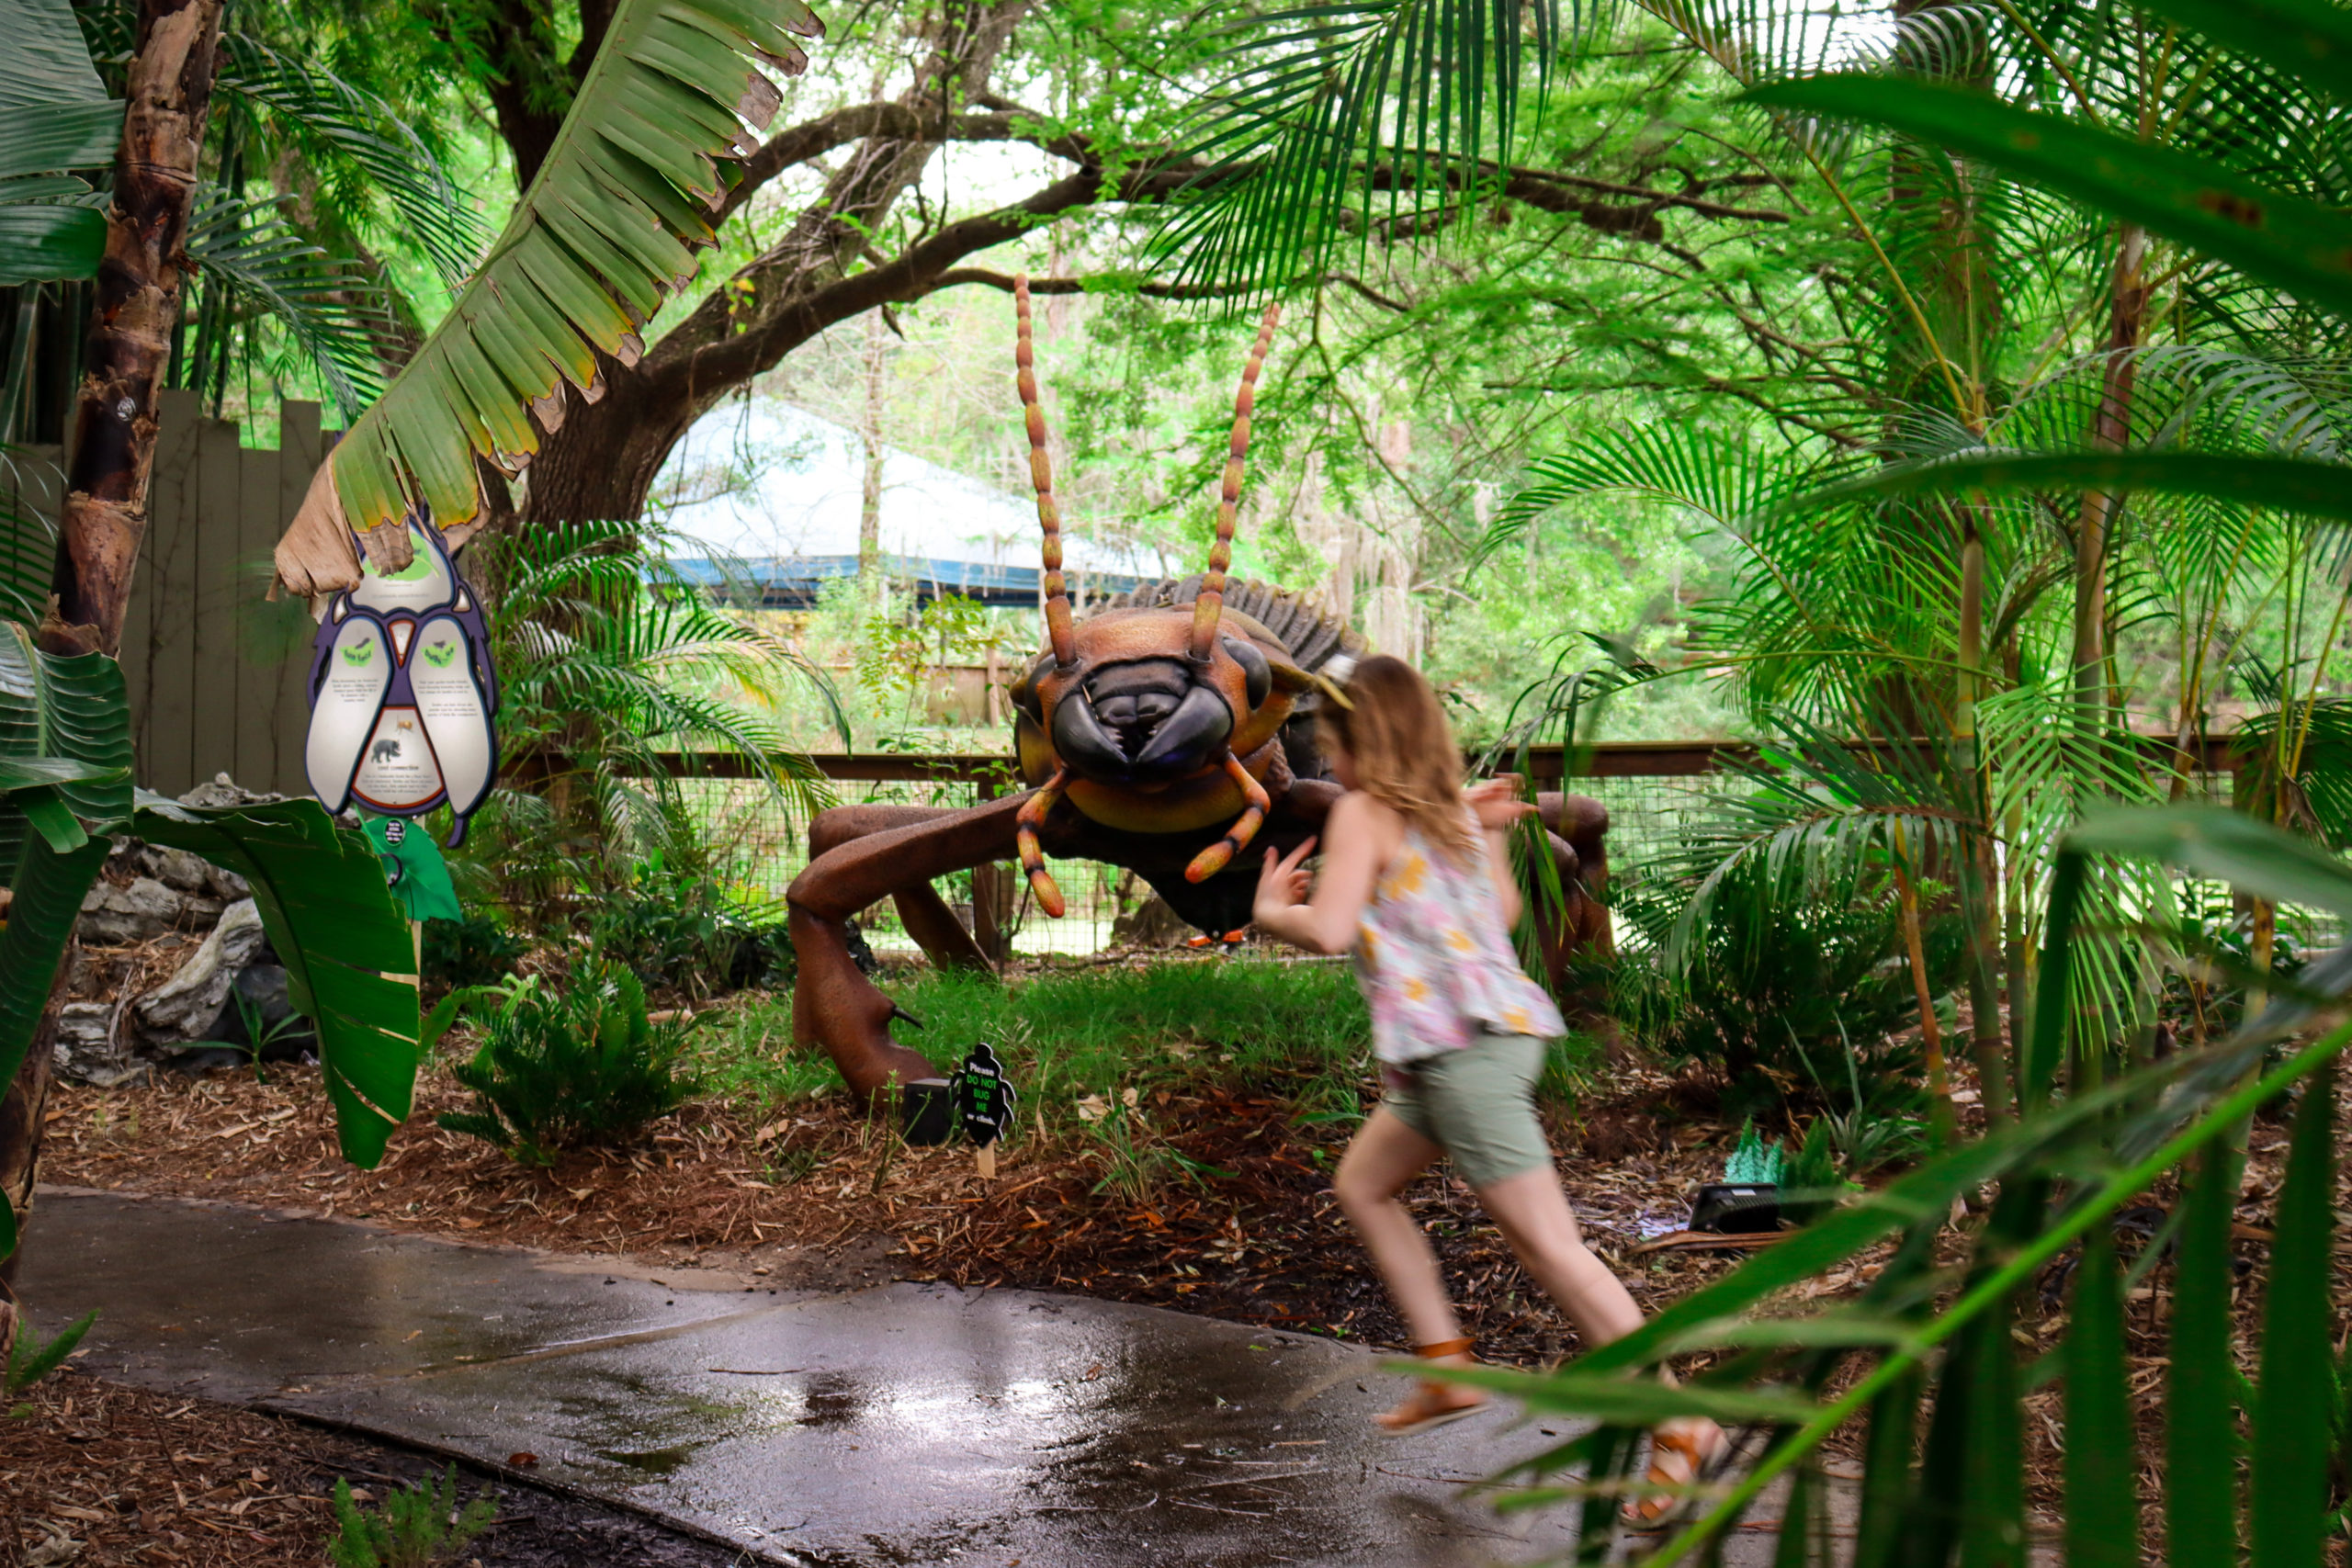 A young girl races by a large animatronic insect at ZooTampa, one of the best things to do in Tampa Bay with kids.